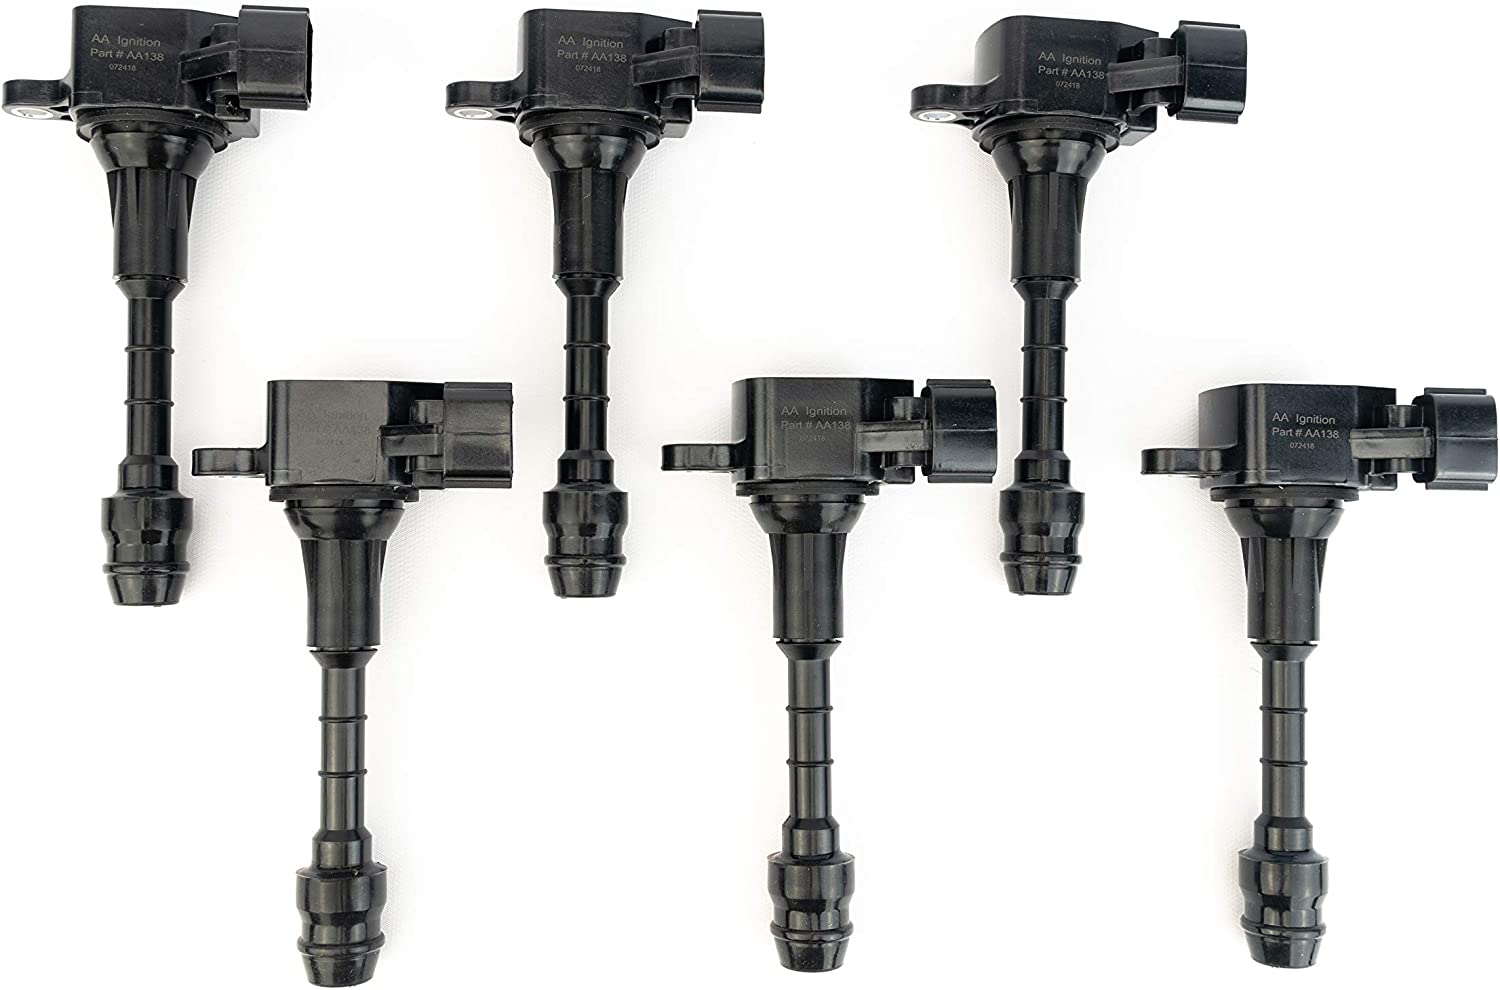 Ignition Coil Pack Set of 6 - Compatible with Infiniti & Nissan Vehicles - FX35, G35, M35, 350Z - Replaces 22448-AL61C, UF401, IGC0007, 6734025, 22448AL615 - Year Models 2000-2008 - 3.5L V6 Coils